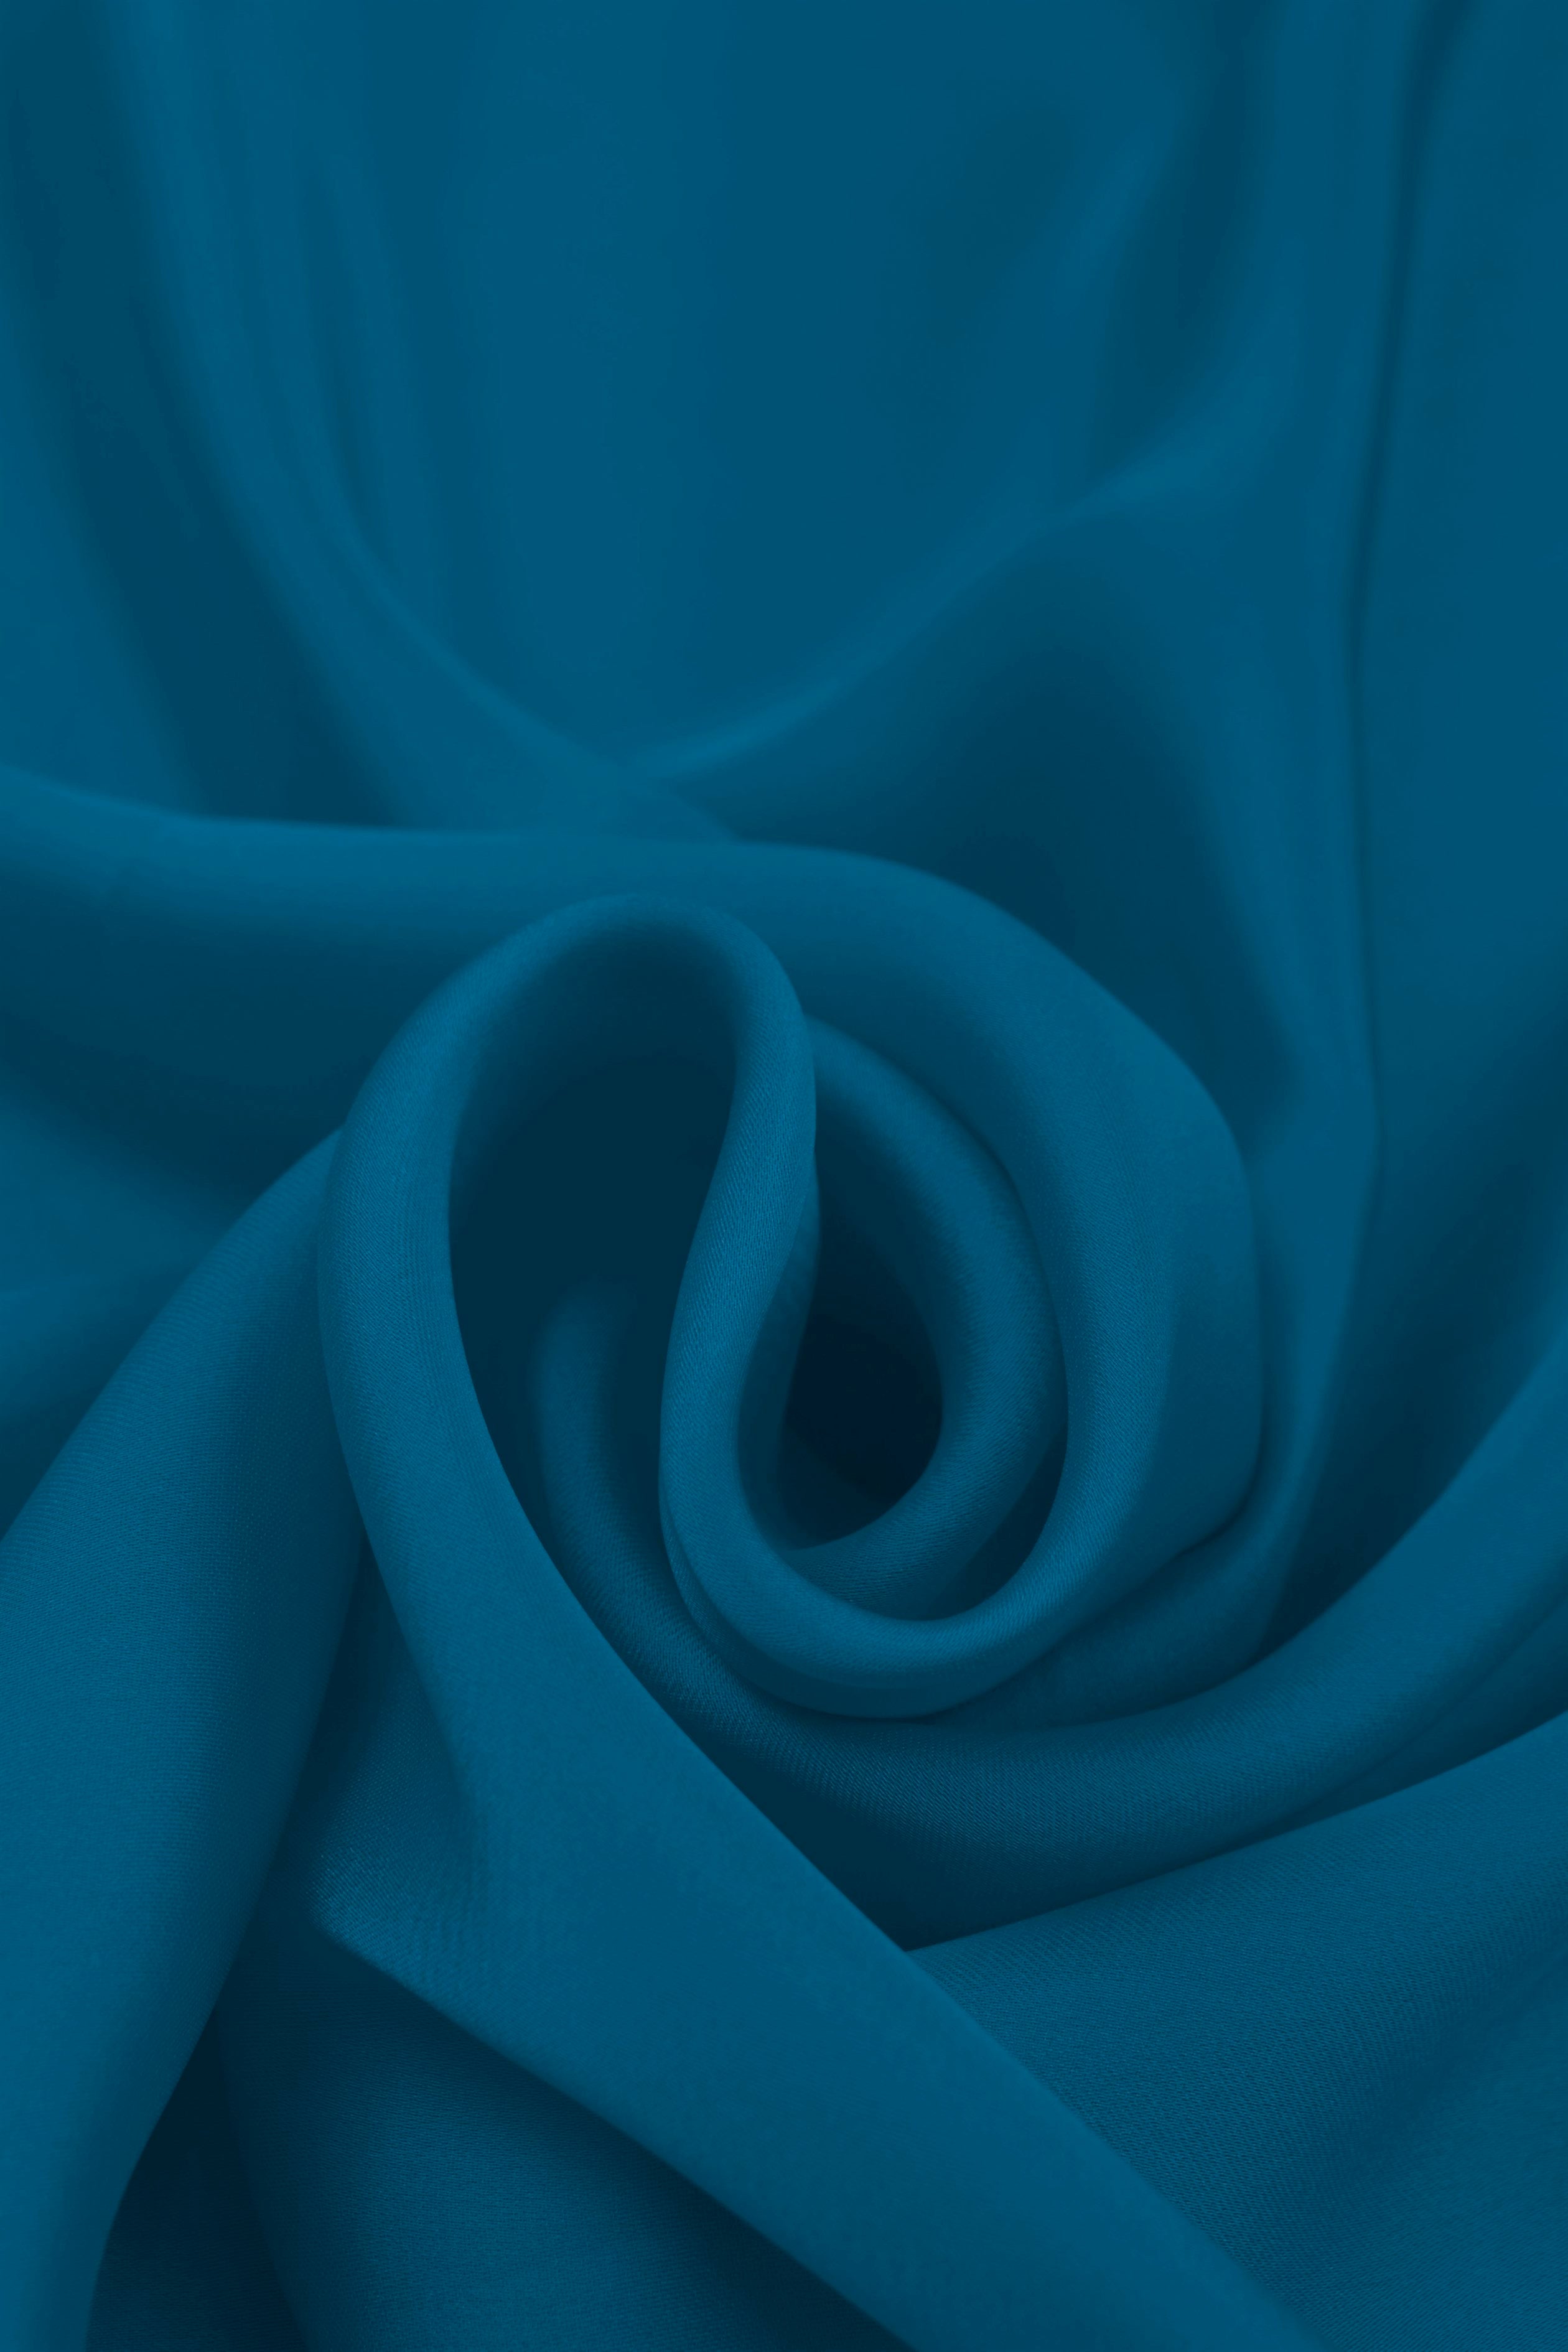 Cationic Dark Teal Plain Dyed Satin Georgette Fabric